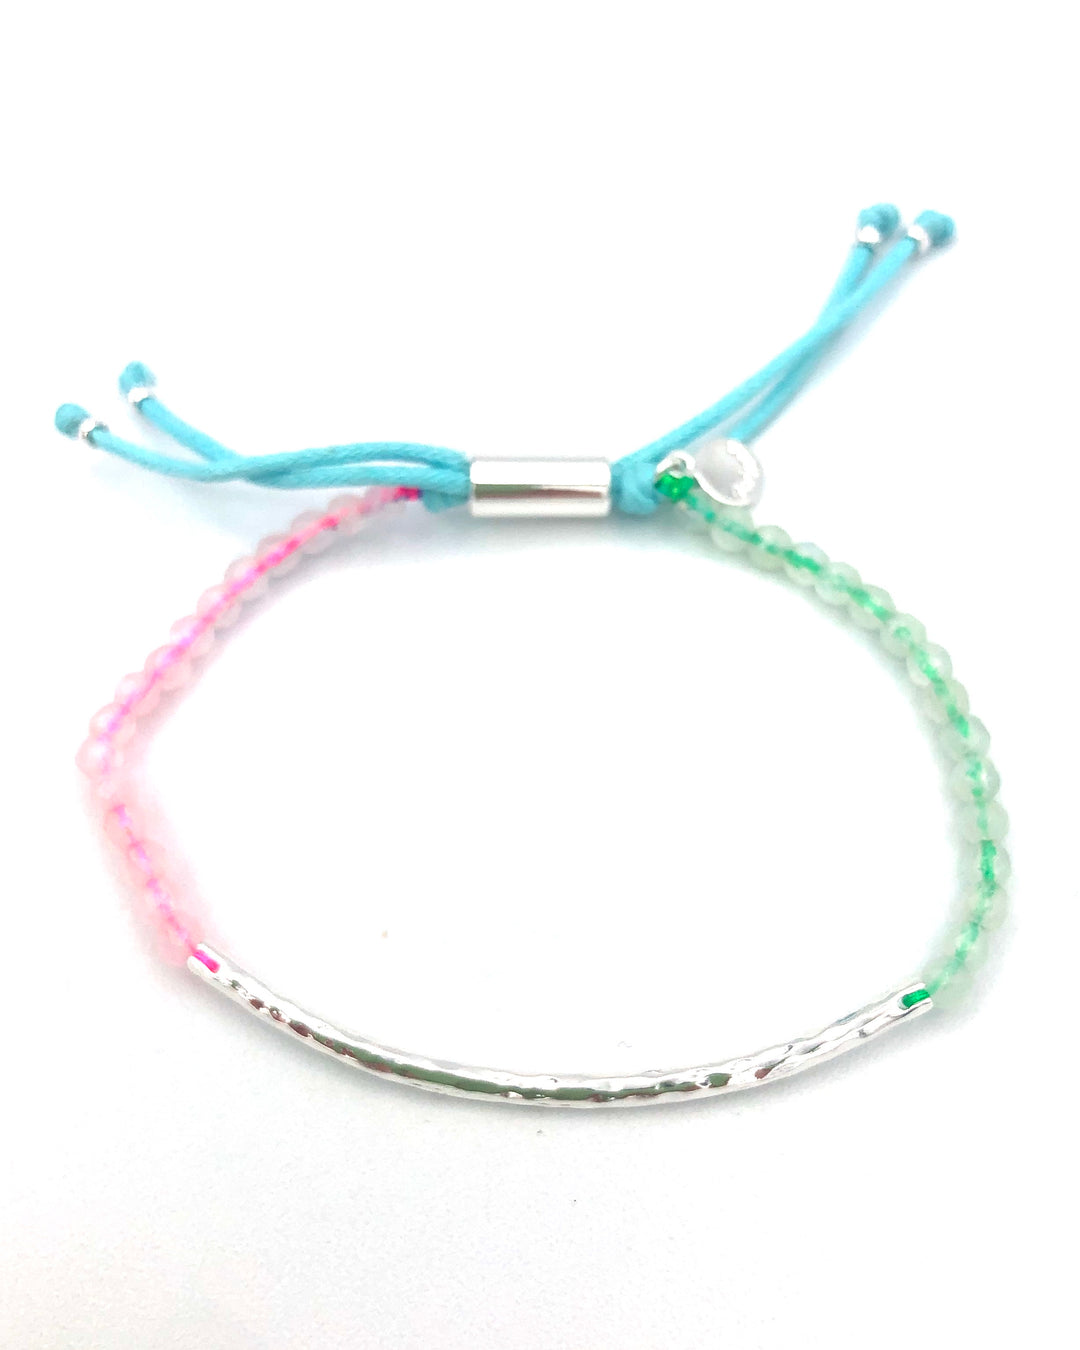 Beaded Rope Bracelet With Silver Bar - Black, Pink and Neon Multicolor